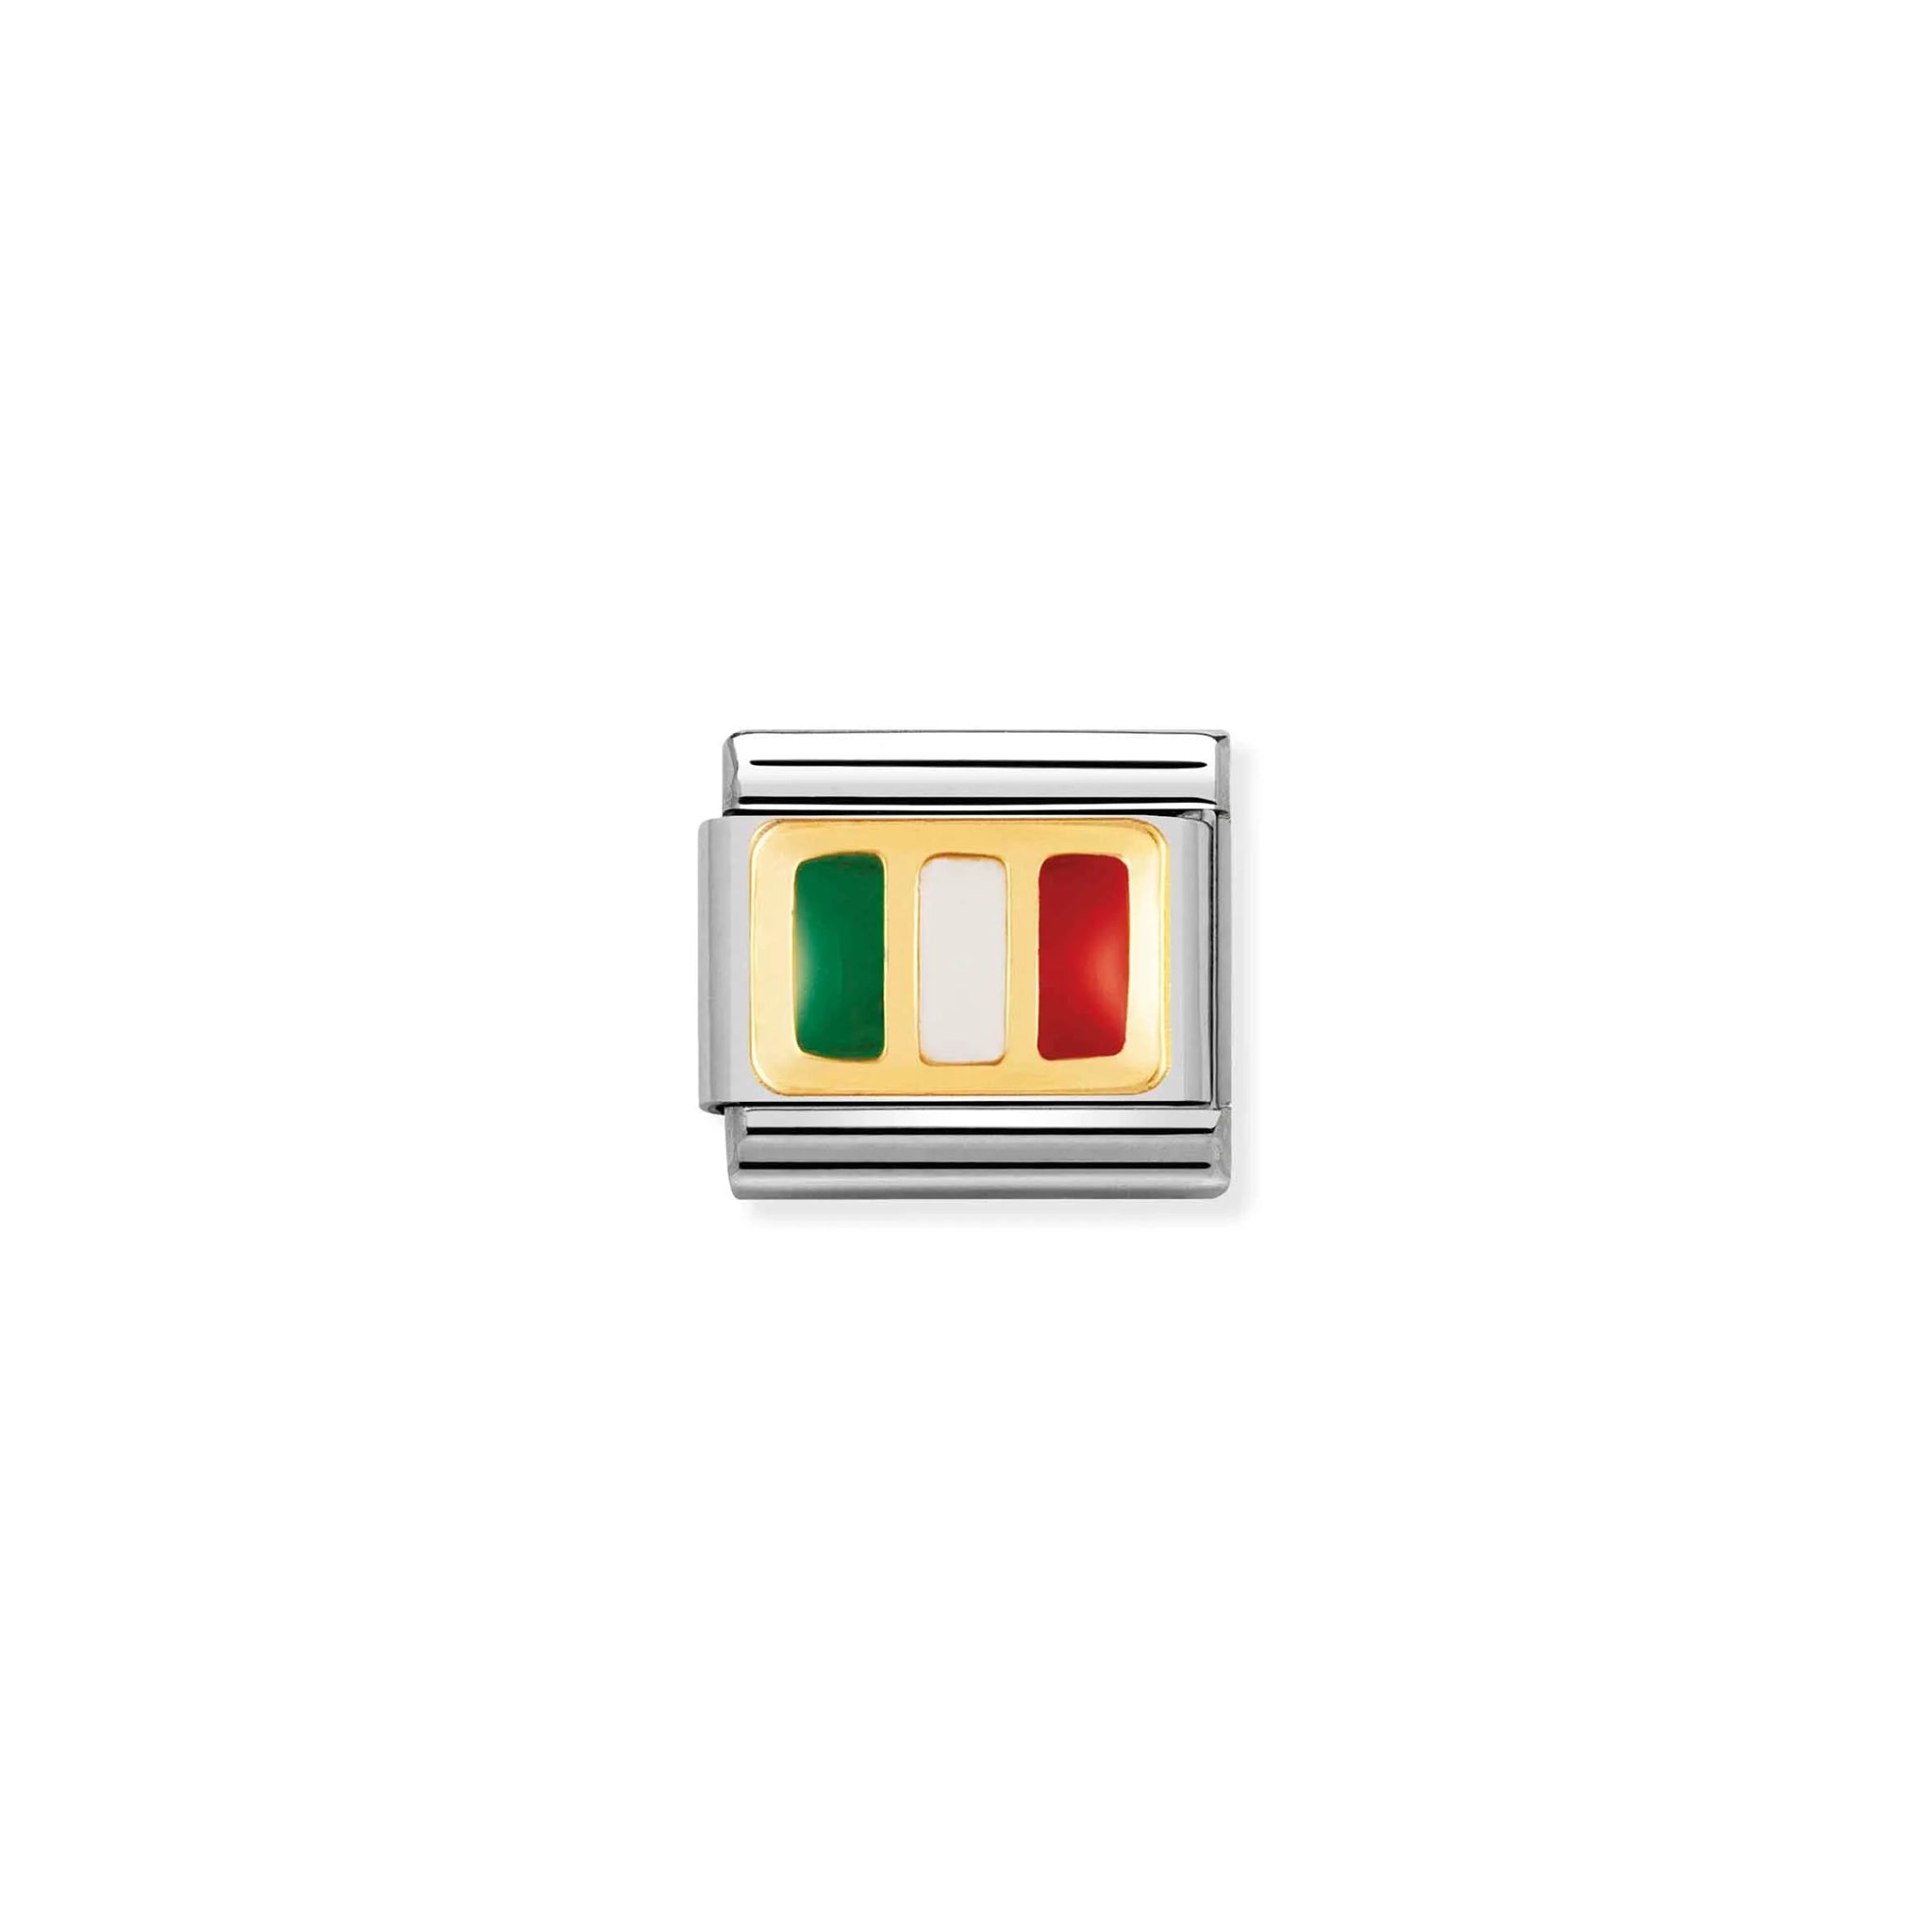 A Nomination charm link featuring the Italy flag in gold and enamel